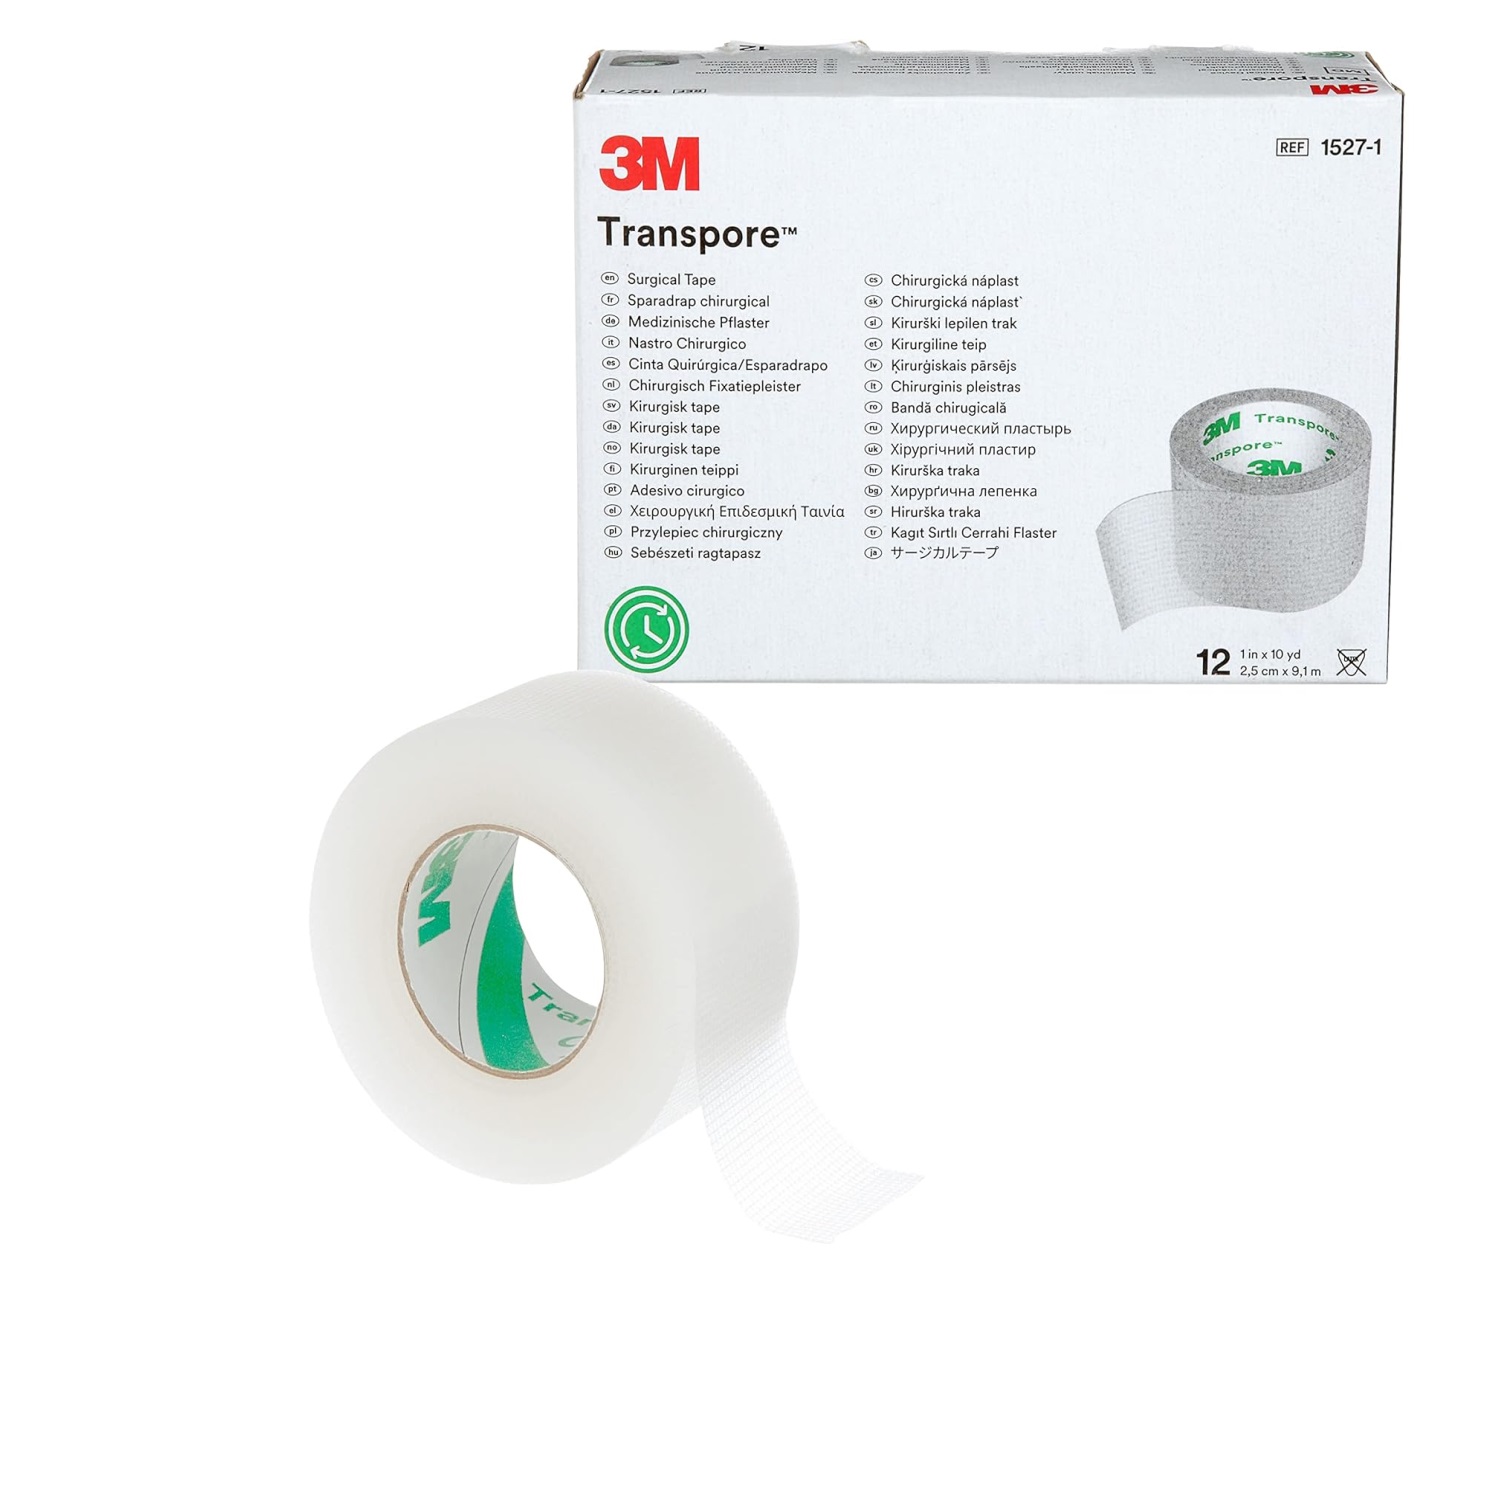 3M TRANSPORE SURGICAL TAPE 